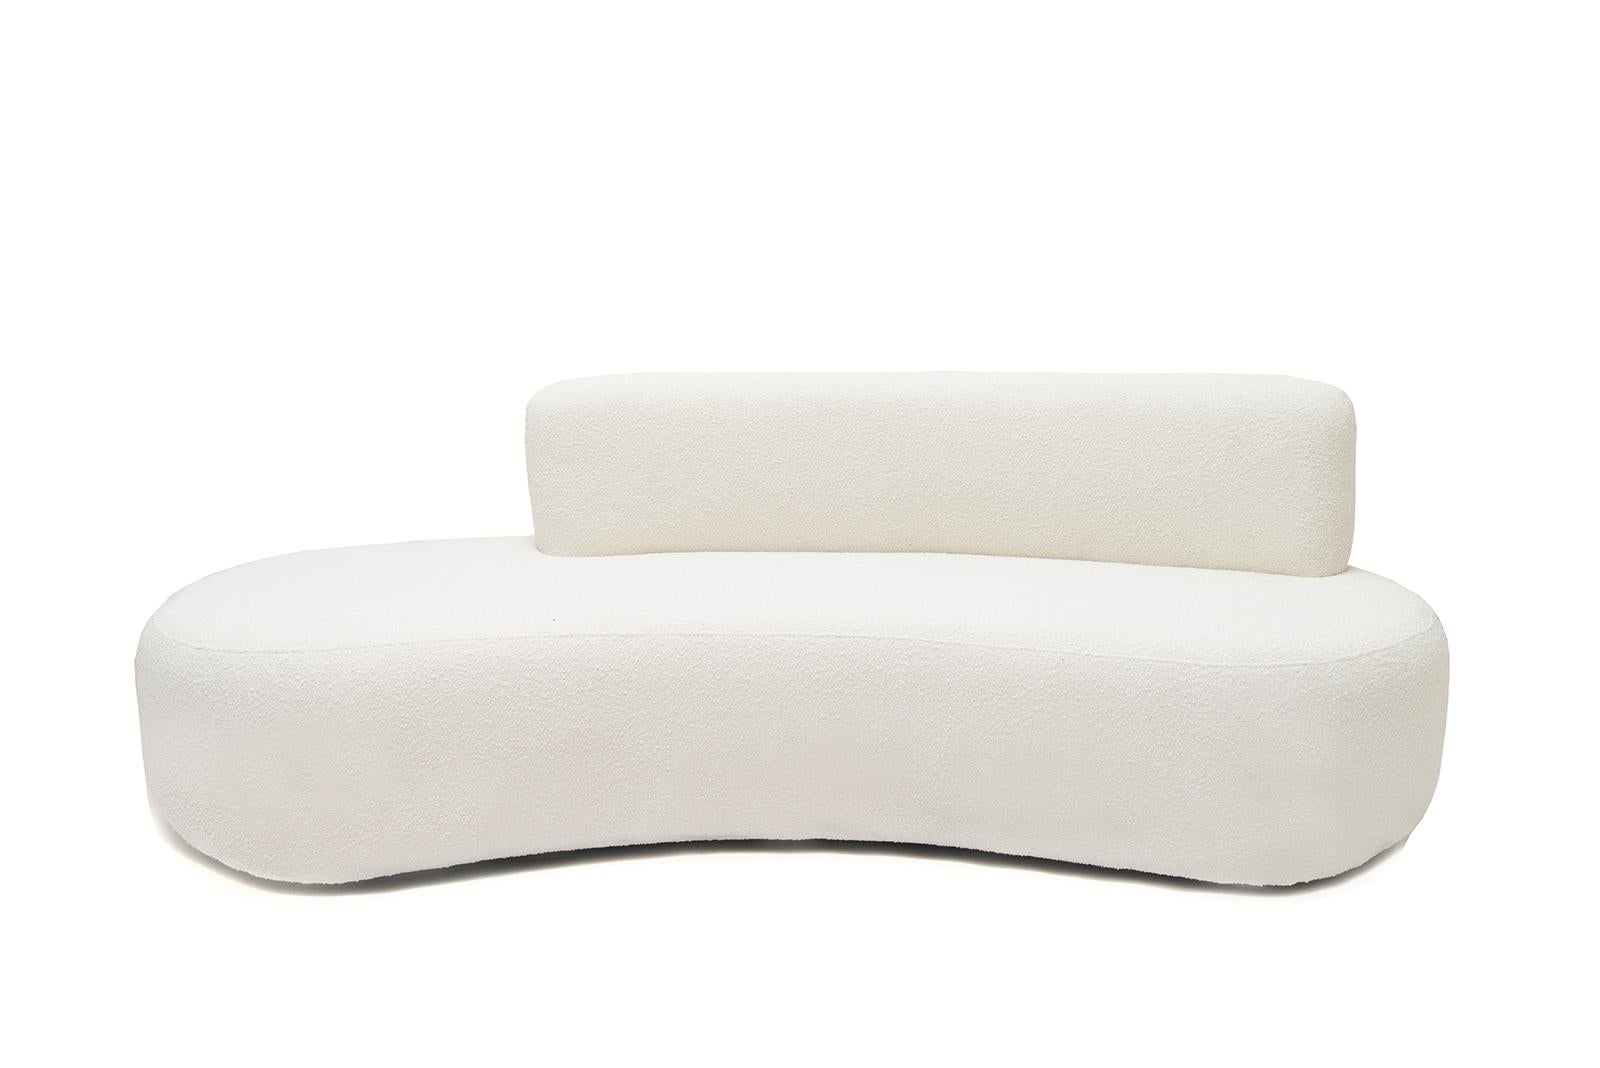 Object 050 sofa by NG Design
Dimensions: D230 x W106 x H78 cm
Materials: Boucle upholstery

Also Available: All of objects available in different materials and colors on demand.

Object050 is the embodiment of everything you expect from your